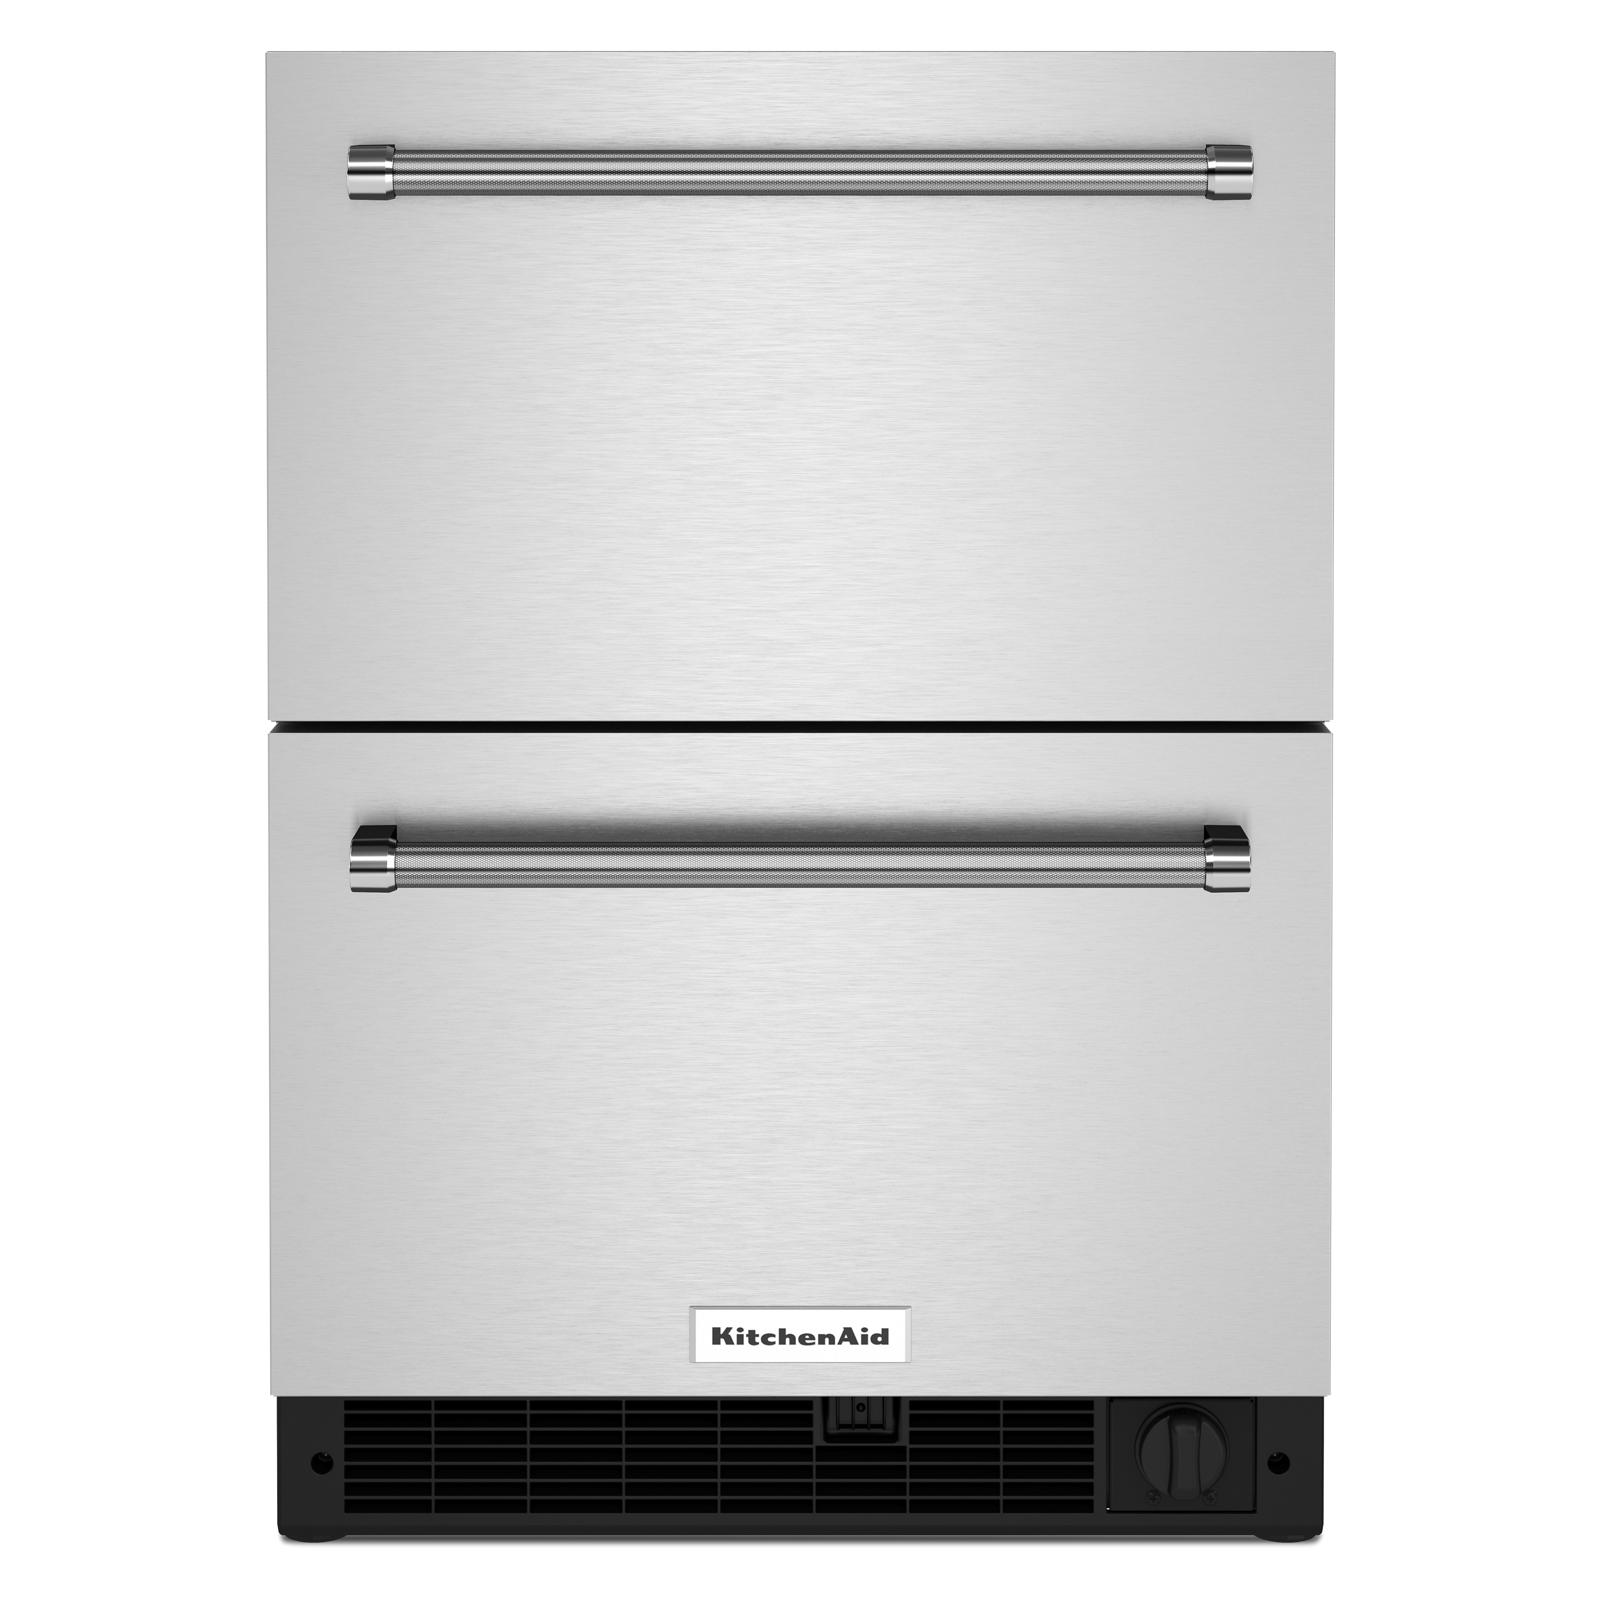 KitchenAid - 23.875 Inch 4.29 cu. ft Undercounter Double-Drawer Refrigerator in Stainless - KUDF204KSB